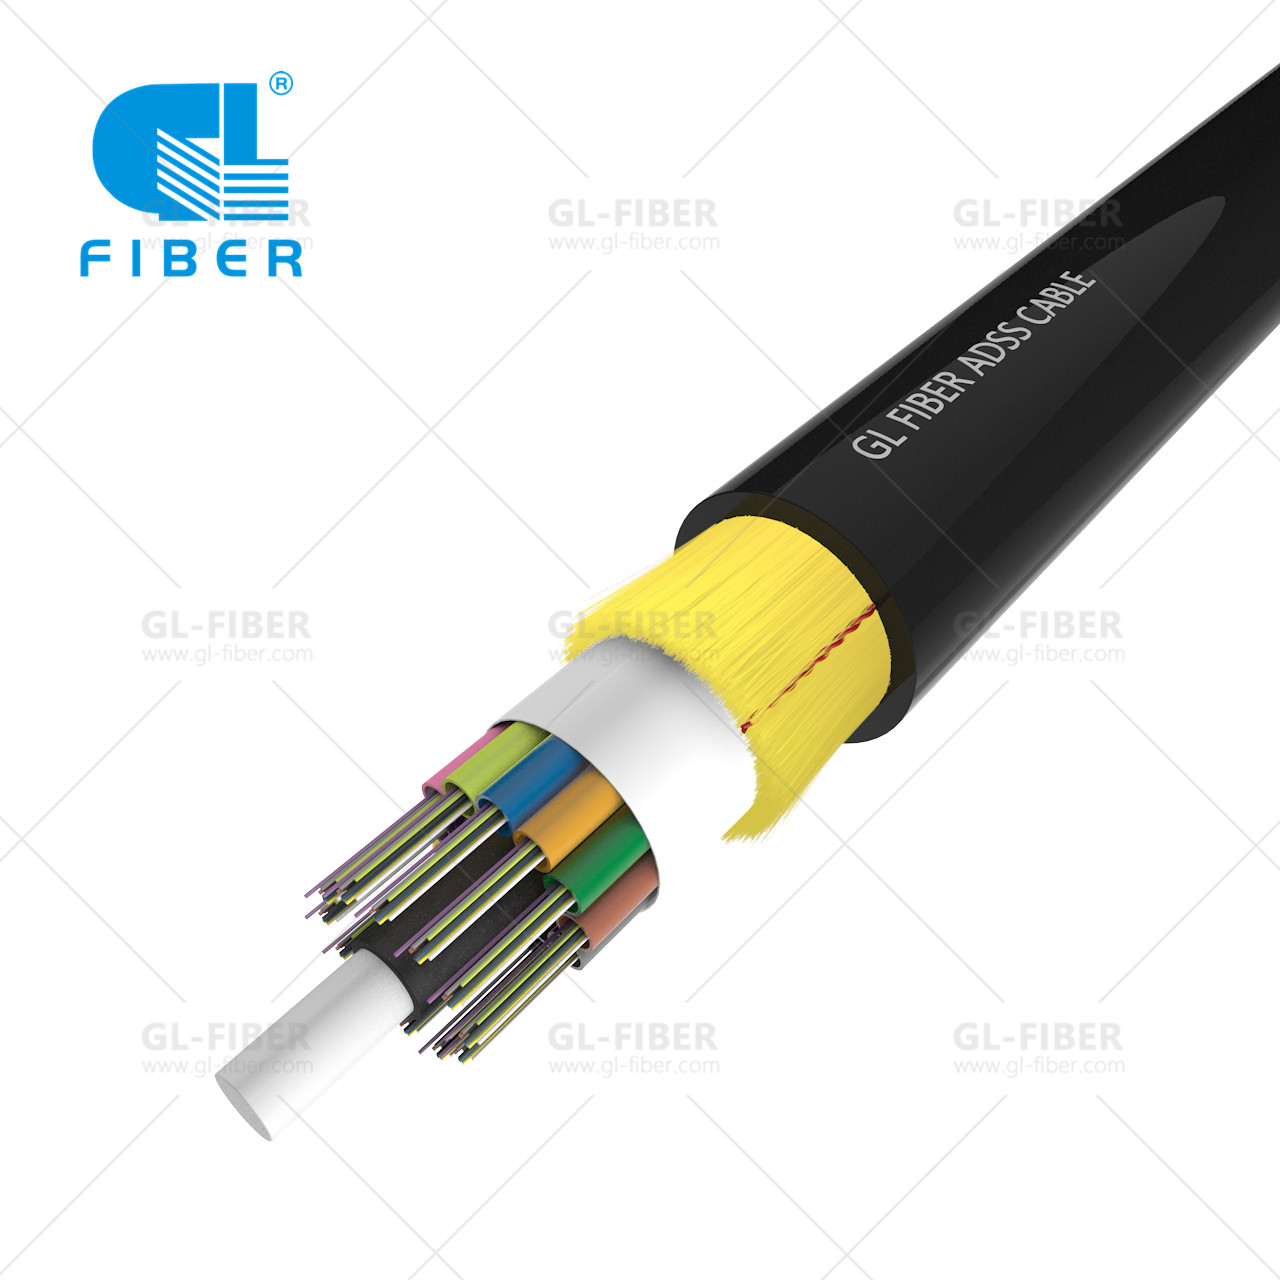 Comparing ADSS Fiber Cable to Other Types of Fiber Optic Cable